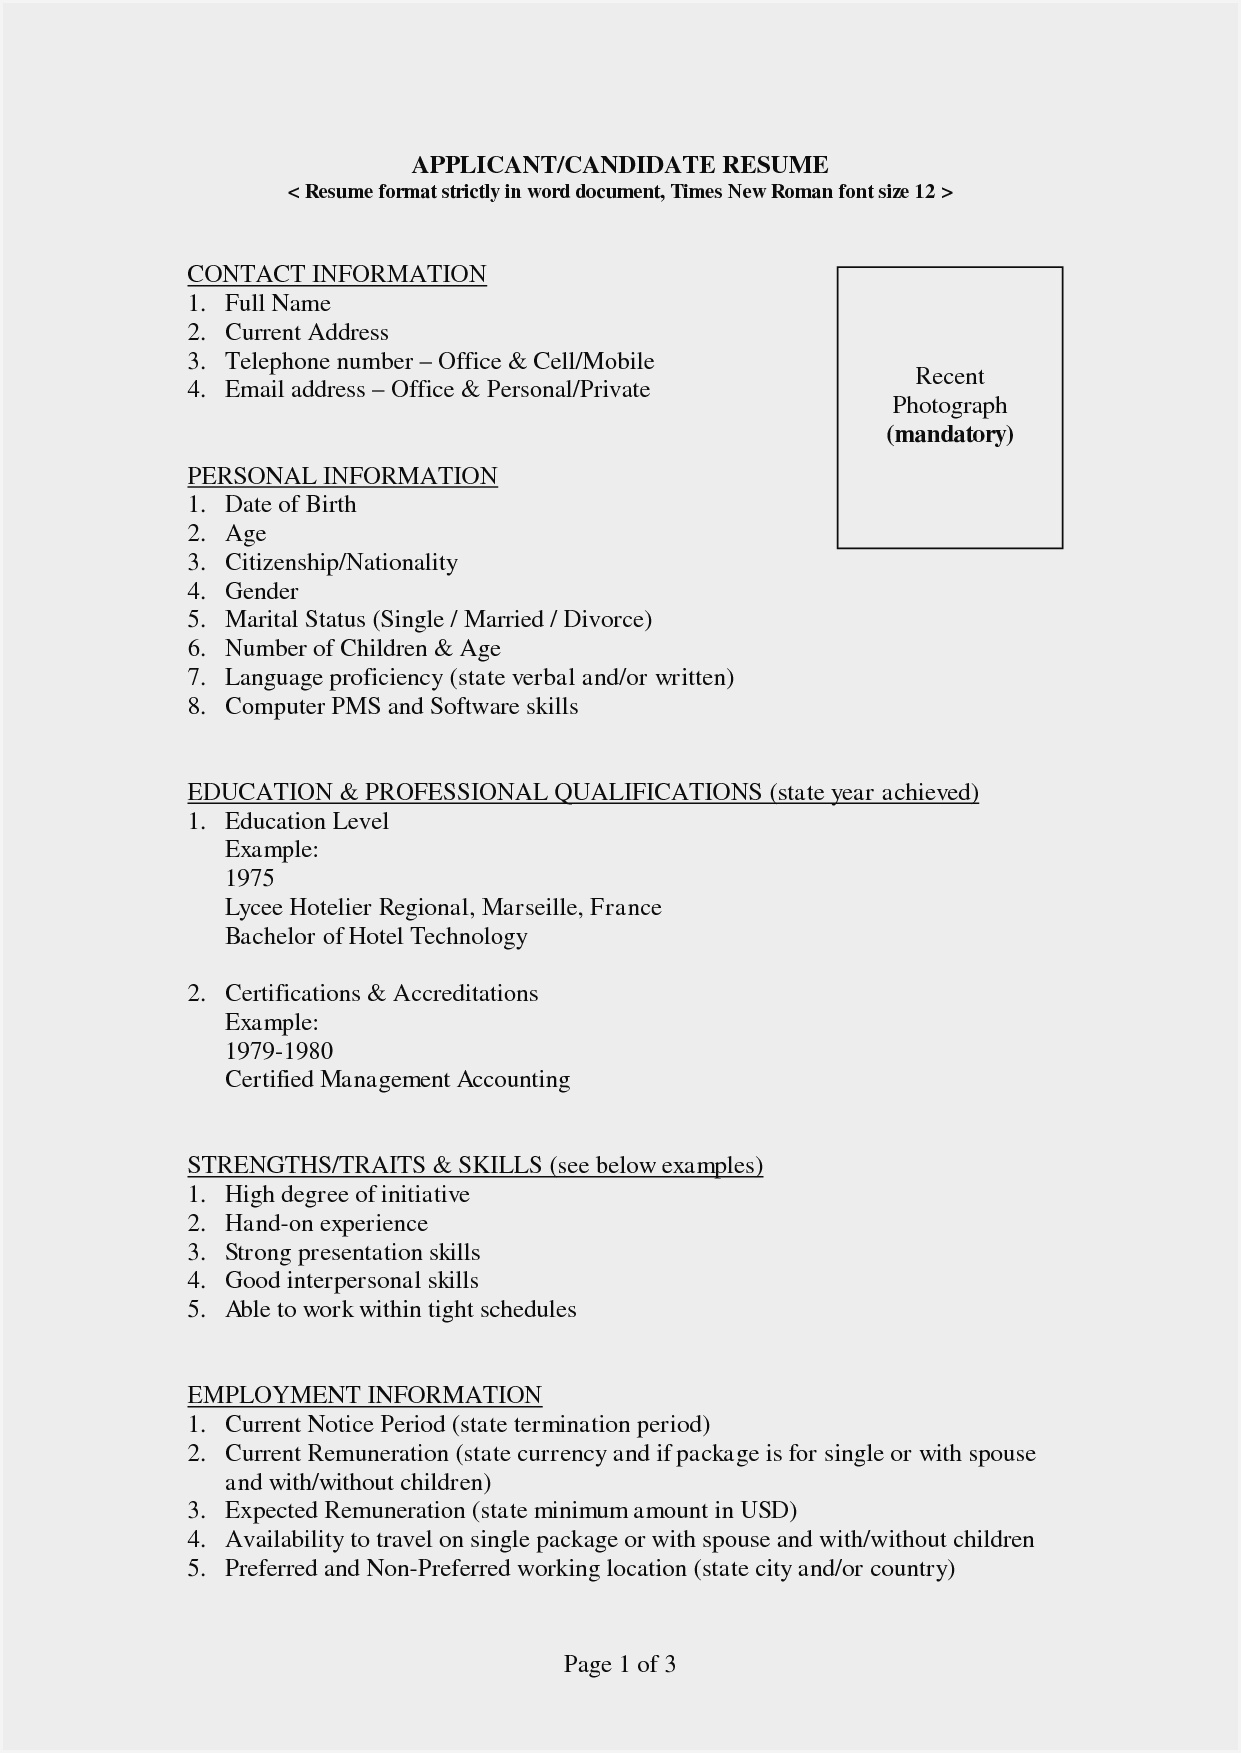 Resume Template Word Download Malaysia – Resume Sample Within Blank Resume Templates For Microsoft Word